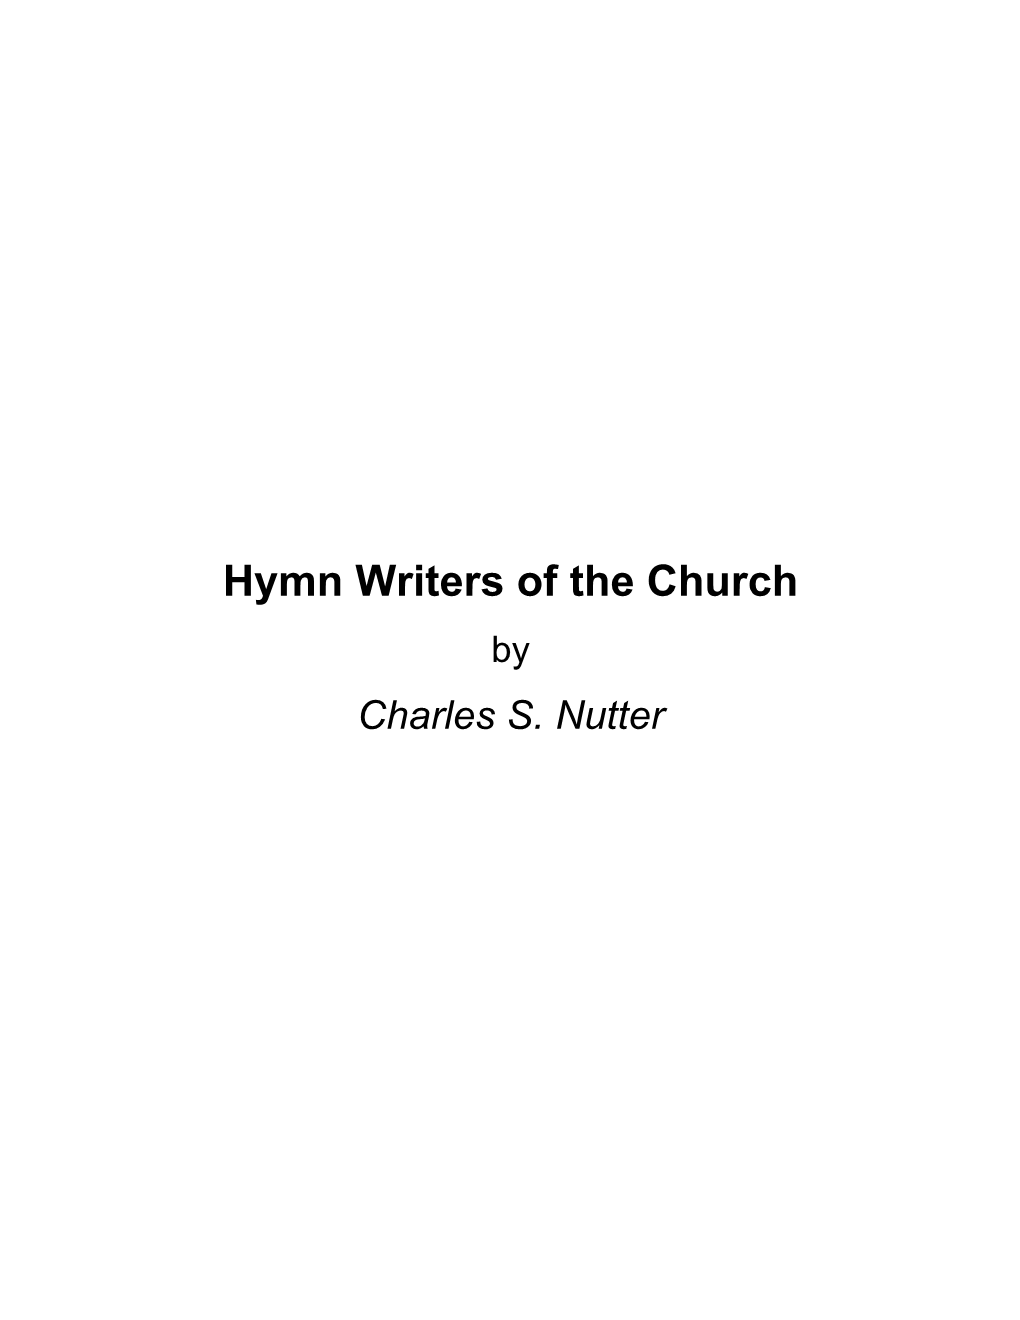 Hymns and Hymn Writers of the Church